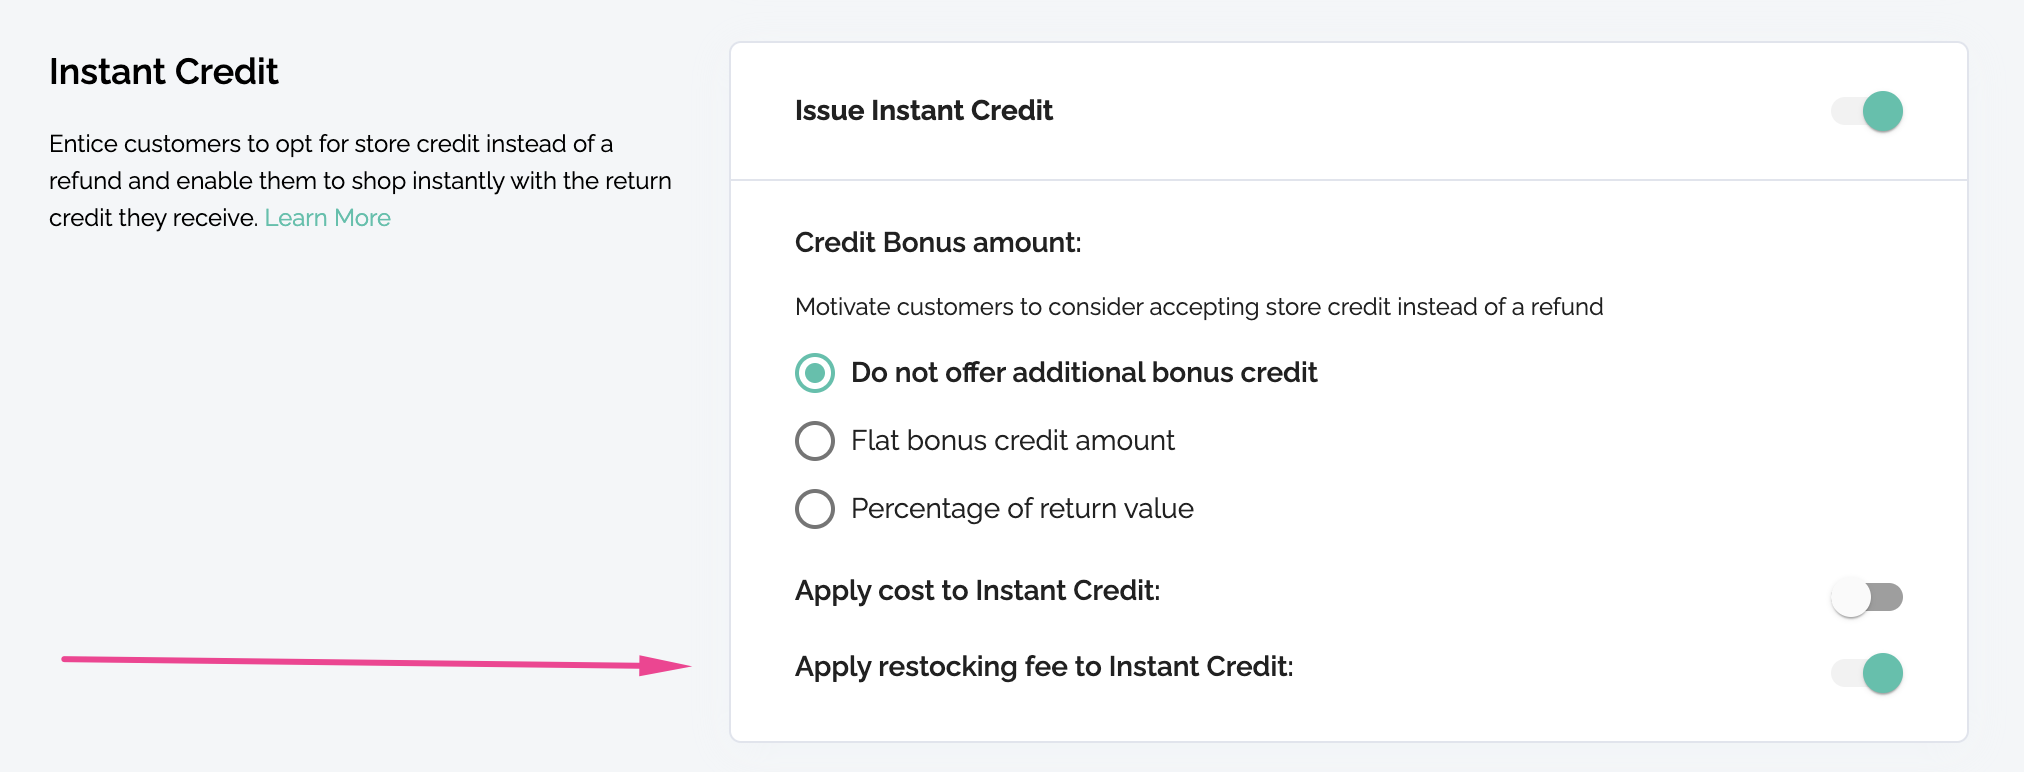 Allow the customer to keep the item for 50% credit